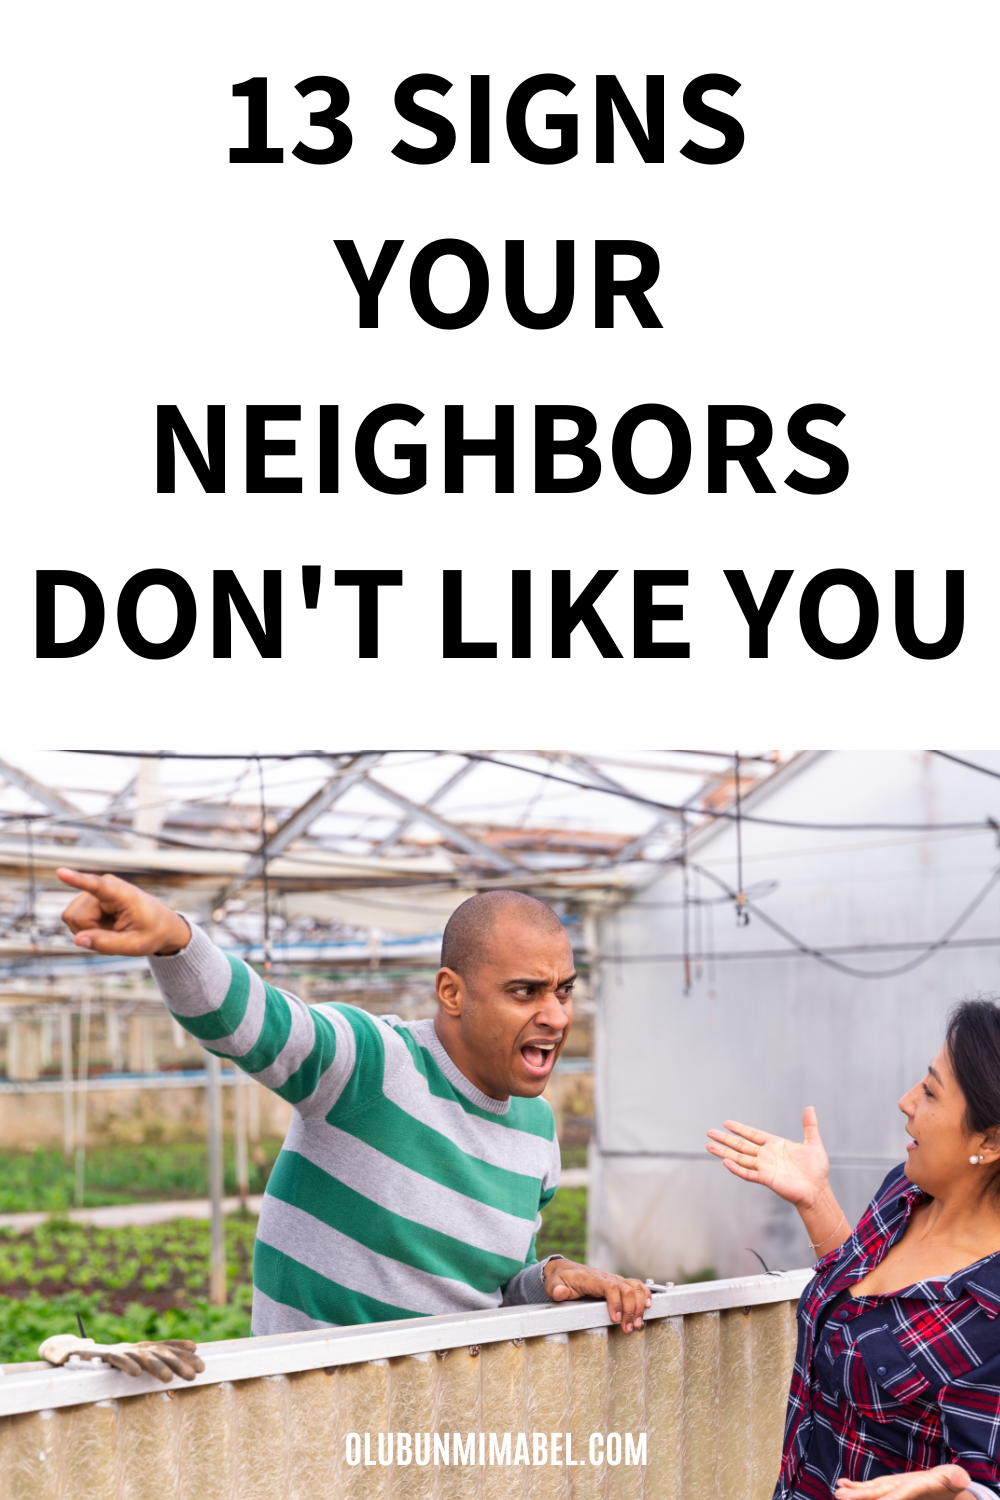 Signs Your Neighbors Don't Like You